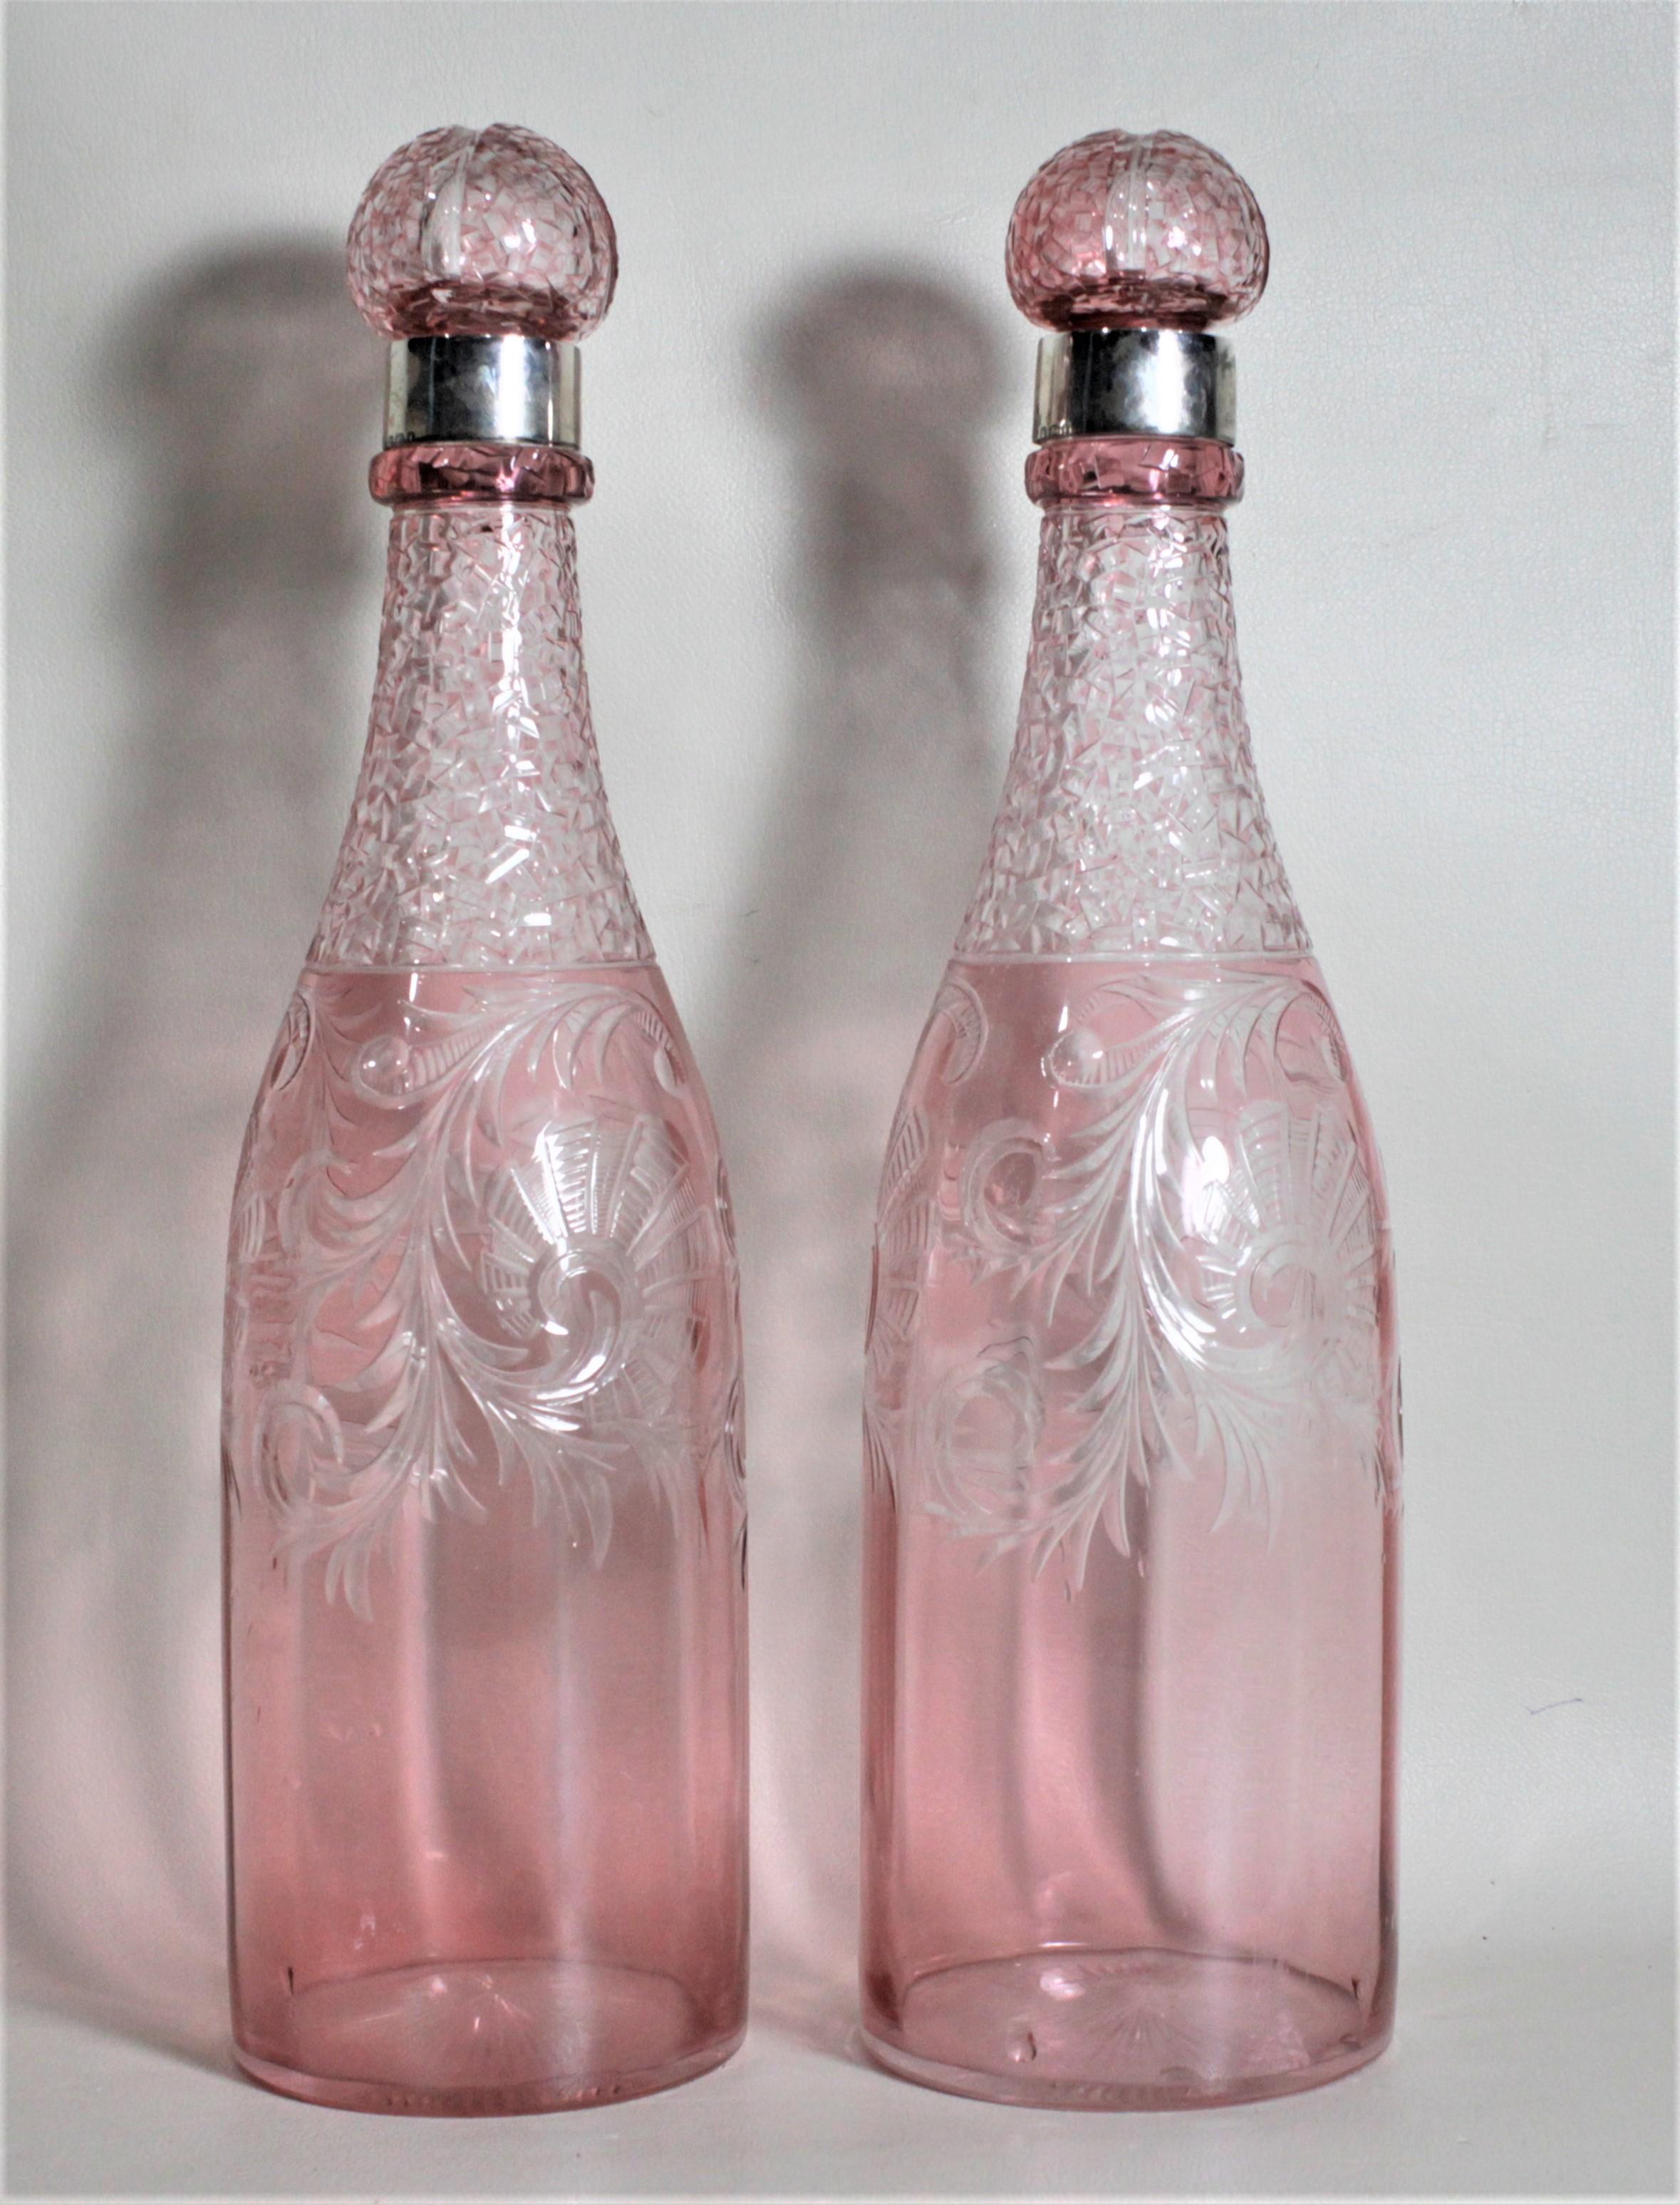 This pair of Victorian cut cranberry crystal bottle decanters were made in Sheffield England in circa 1895. These matching pink decanters have been ornately hand cut with swirled floral decoration on both sides and are done with a textured finish